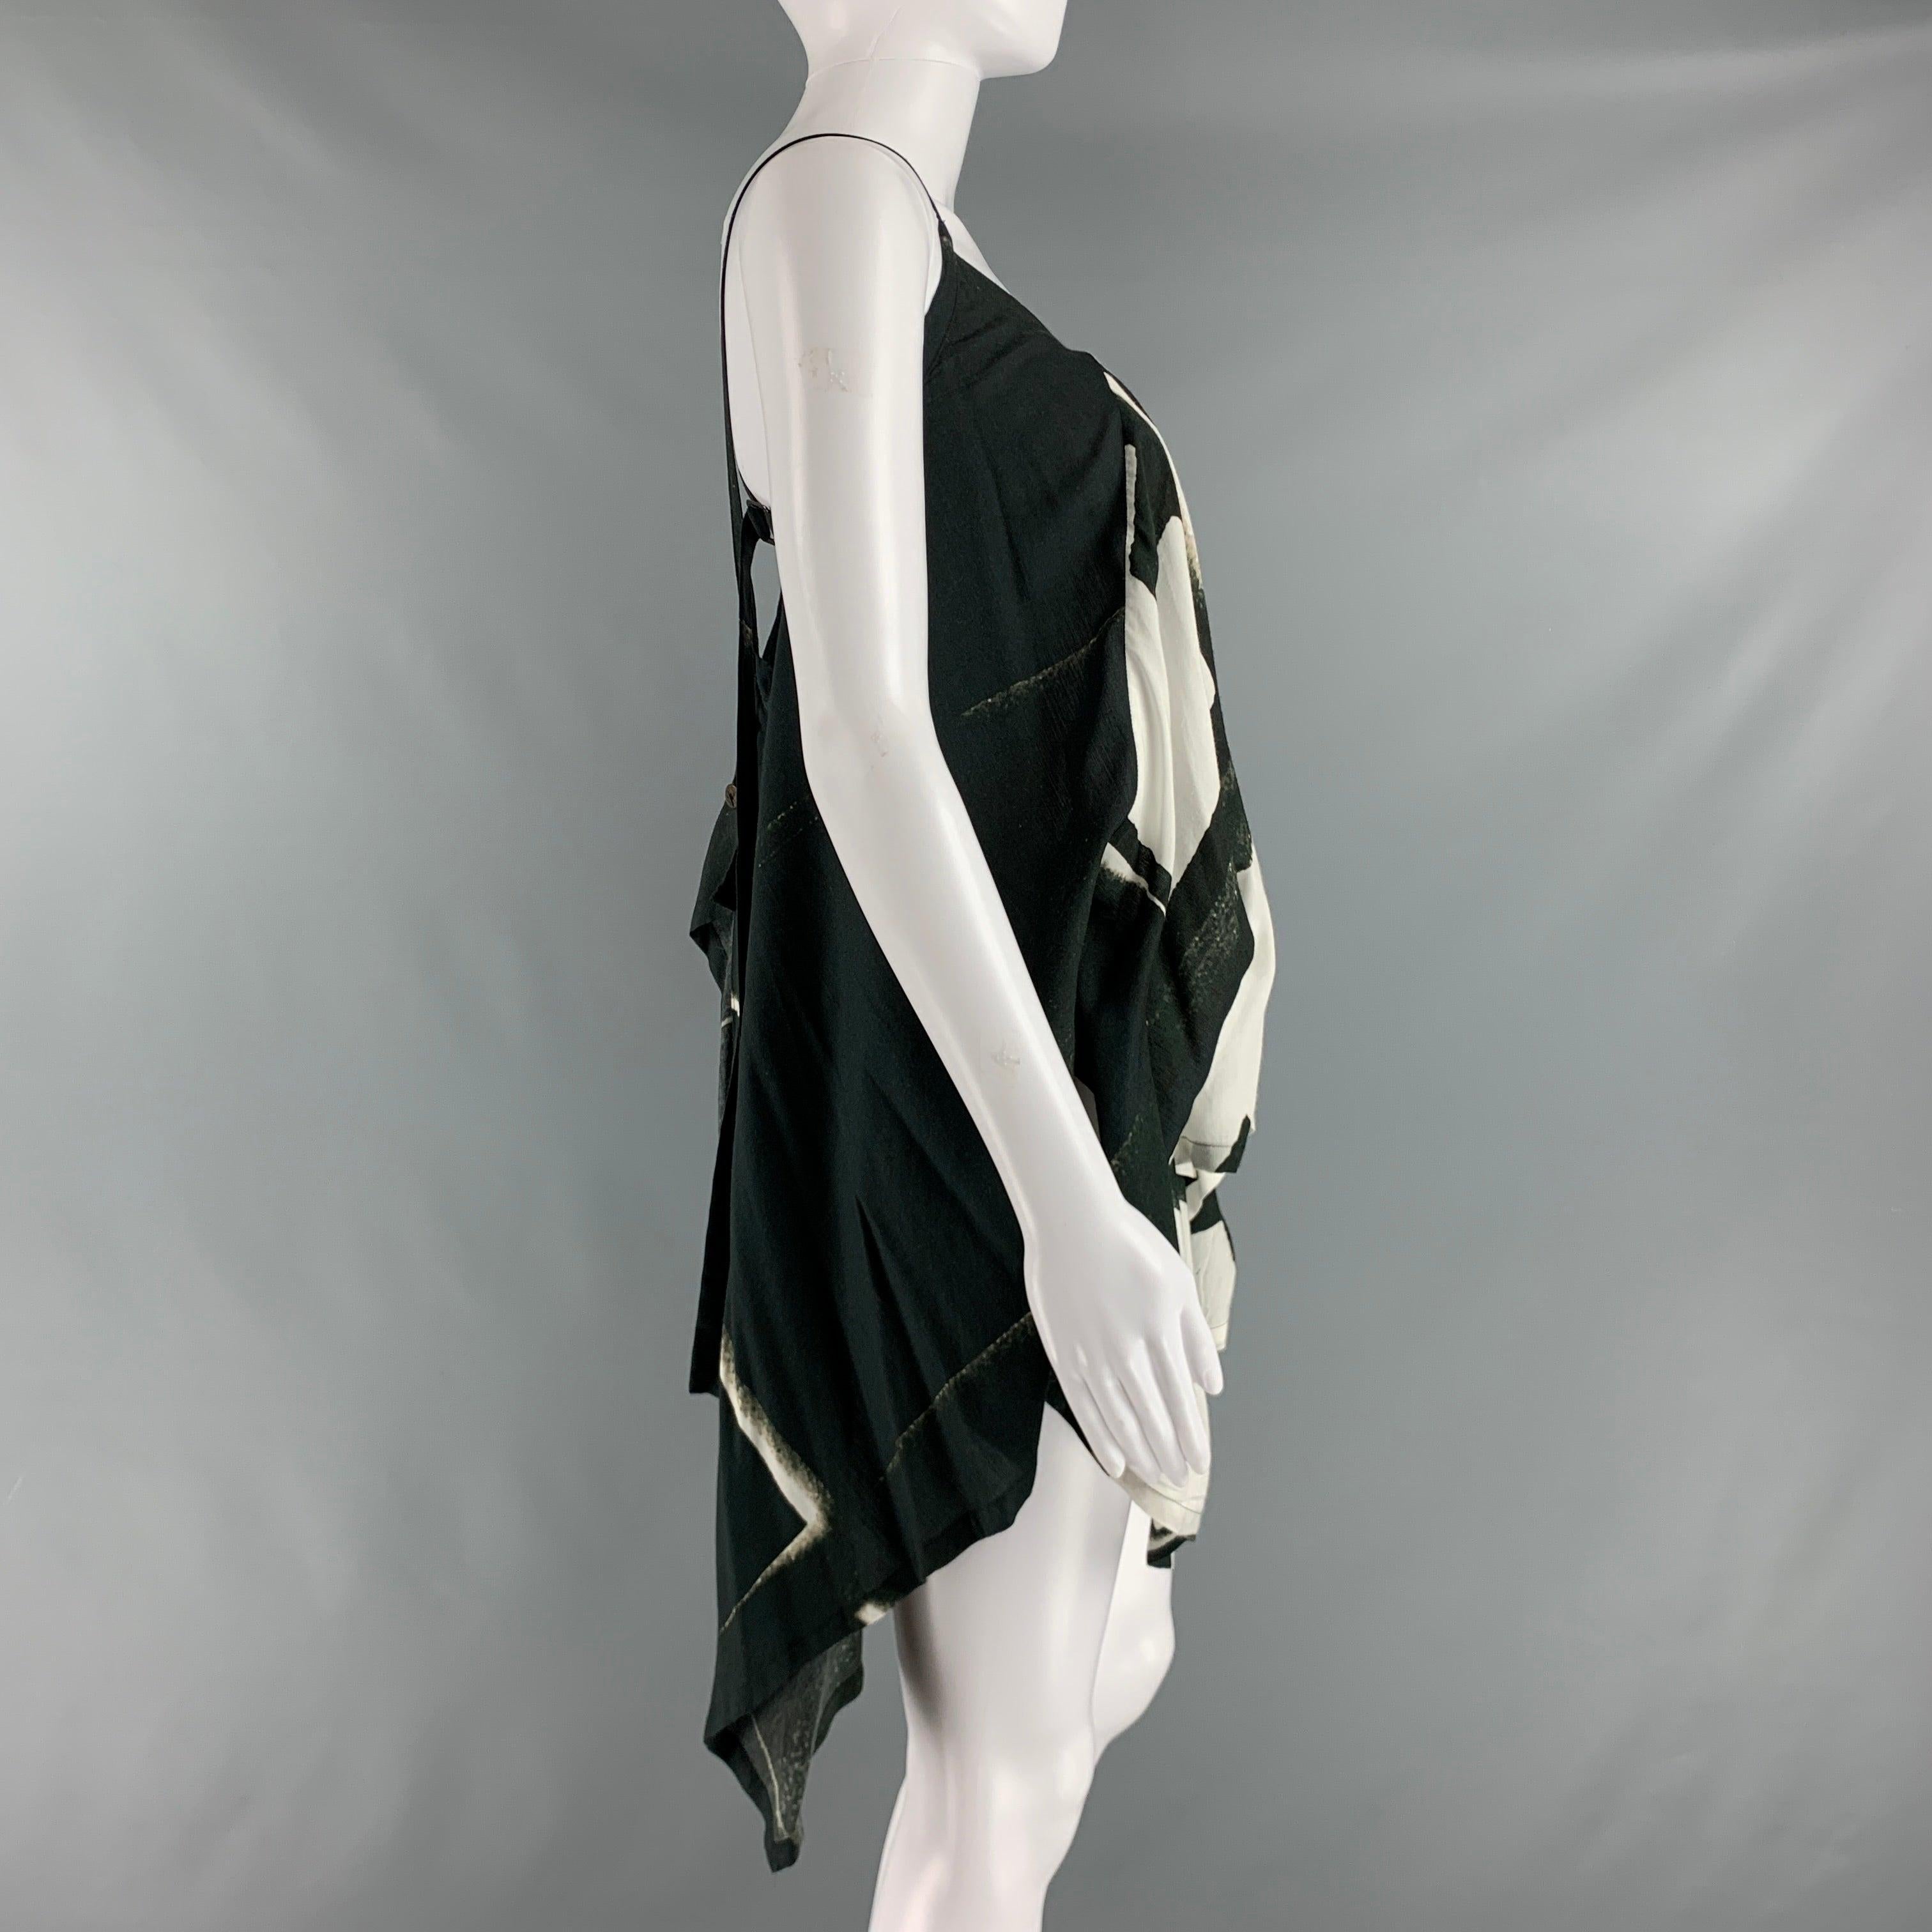 ANN DEMEULEMEESTER tank top comes in black and white abstract print viscose woven features a draped style, asymmetrical hem, and wrap up style.Very Good Pre-Owned Condition.  

Marked:   6 

Measurements: 
  Bust: 37 inLength: 30 in  
  
  
